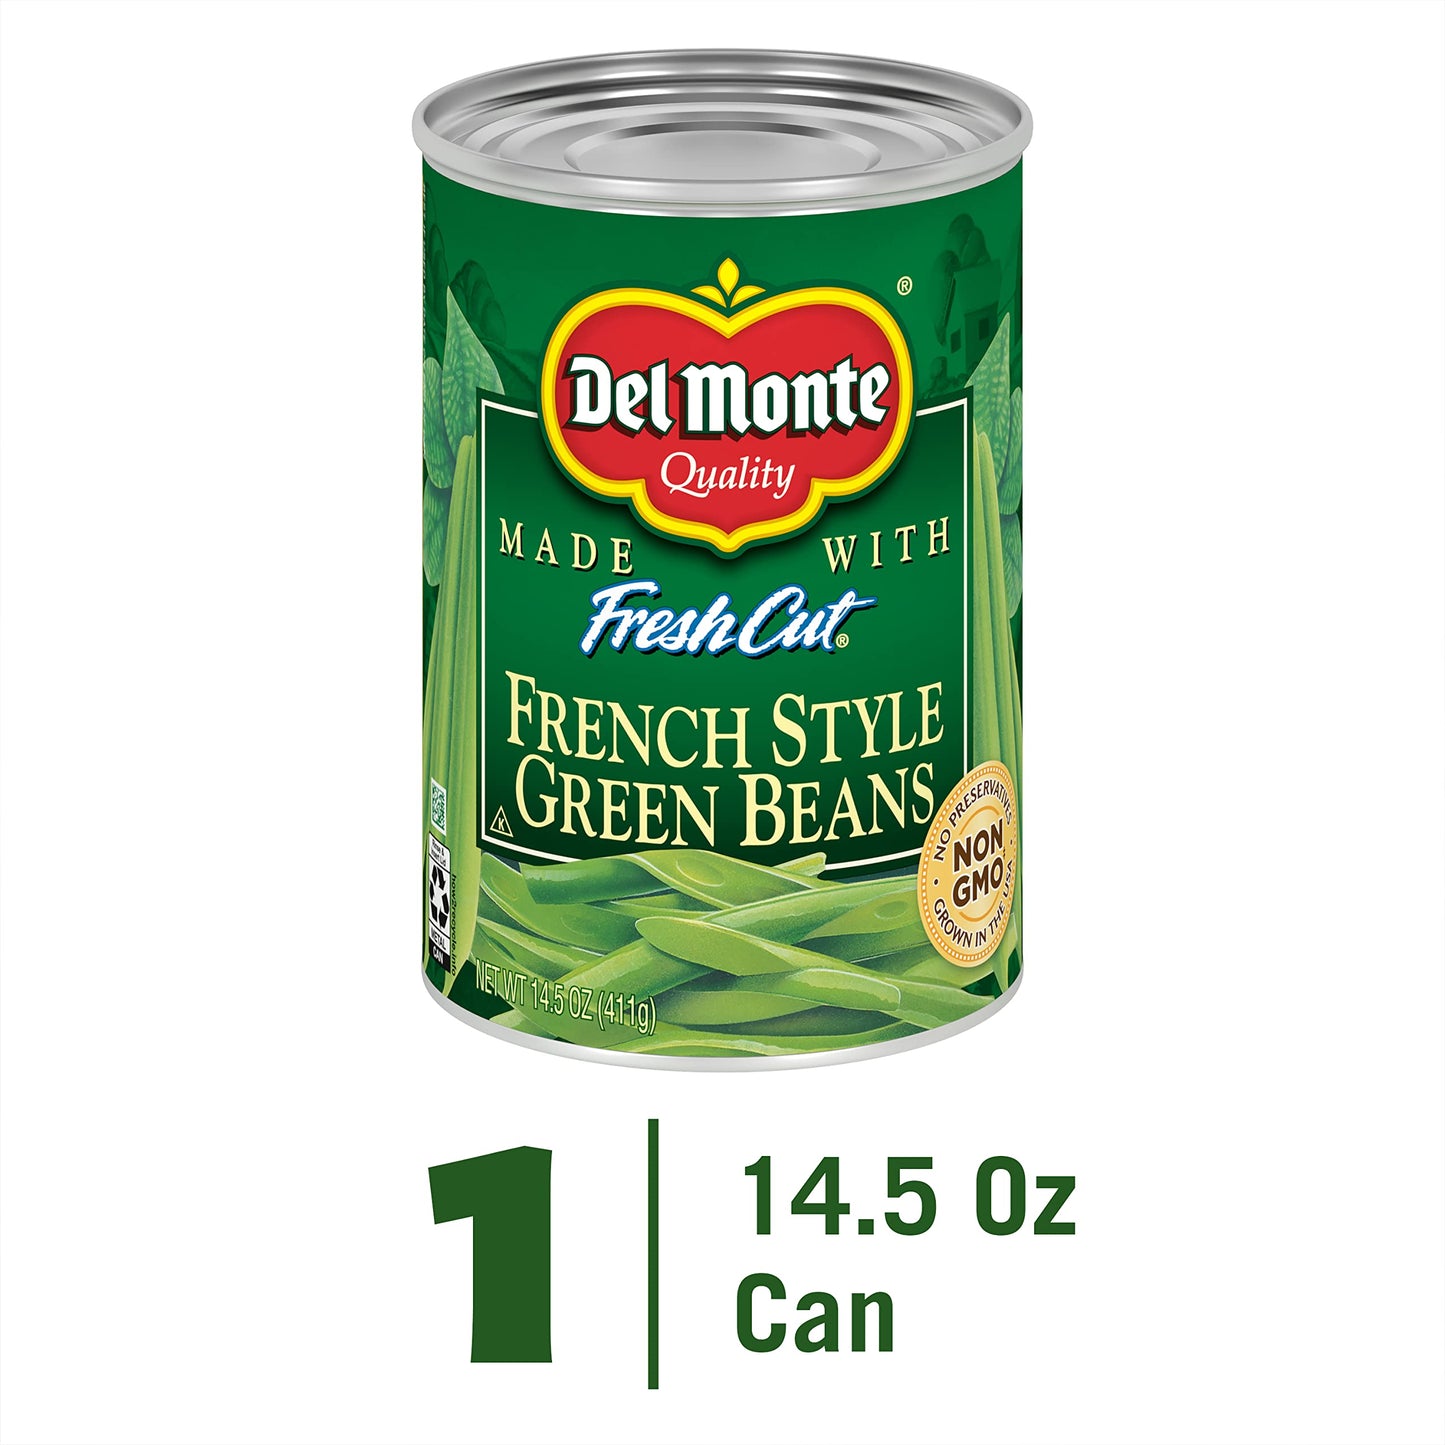 DEL MONTE BLUE LAKE French Style Green Beans, Canned Vegetables, 14.5 oz Can